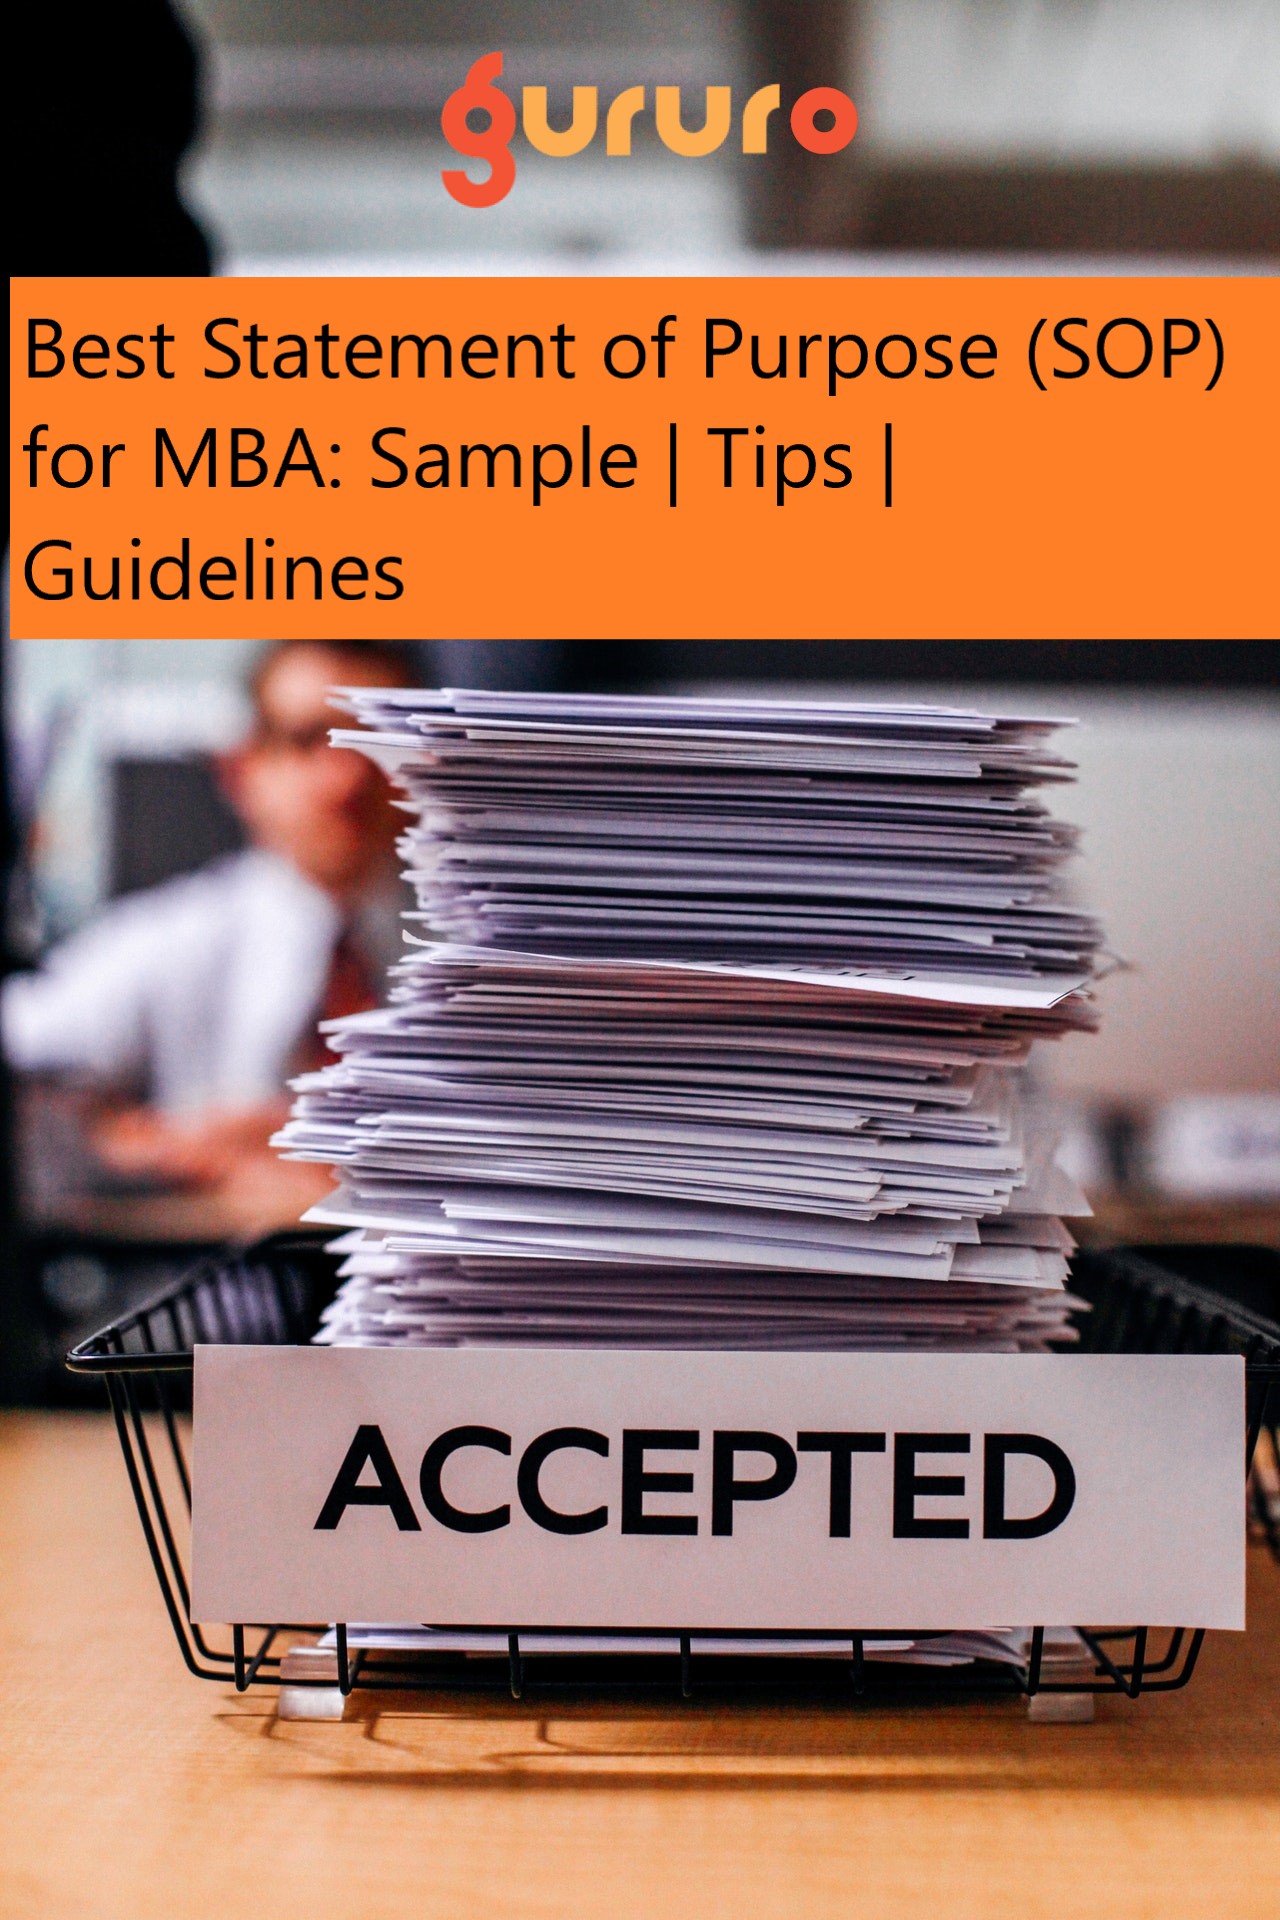 Best Statement of Purpose (SOP) for MBA: Sample | Tips | Guidelines